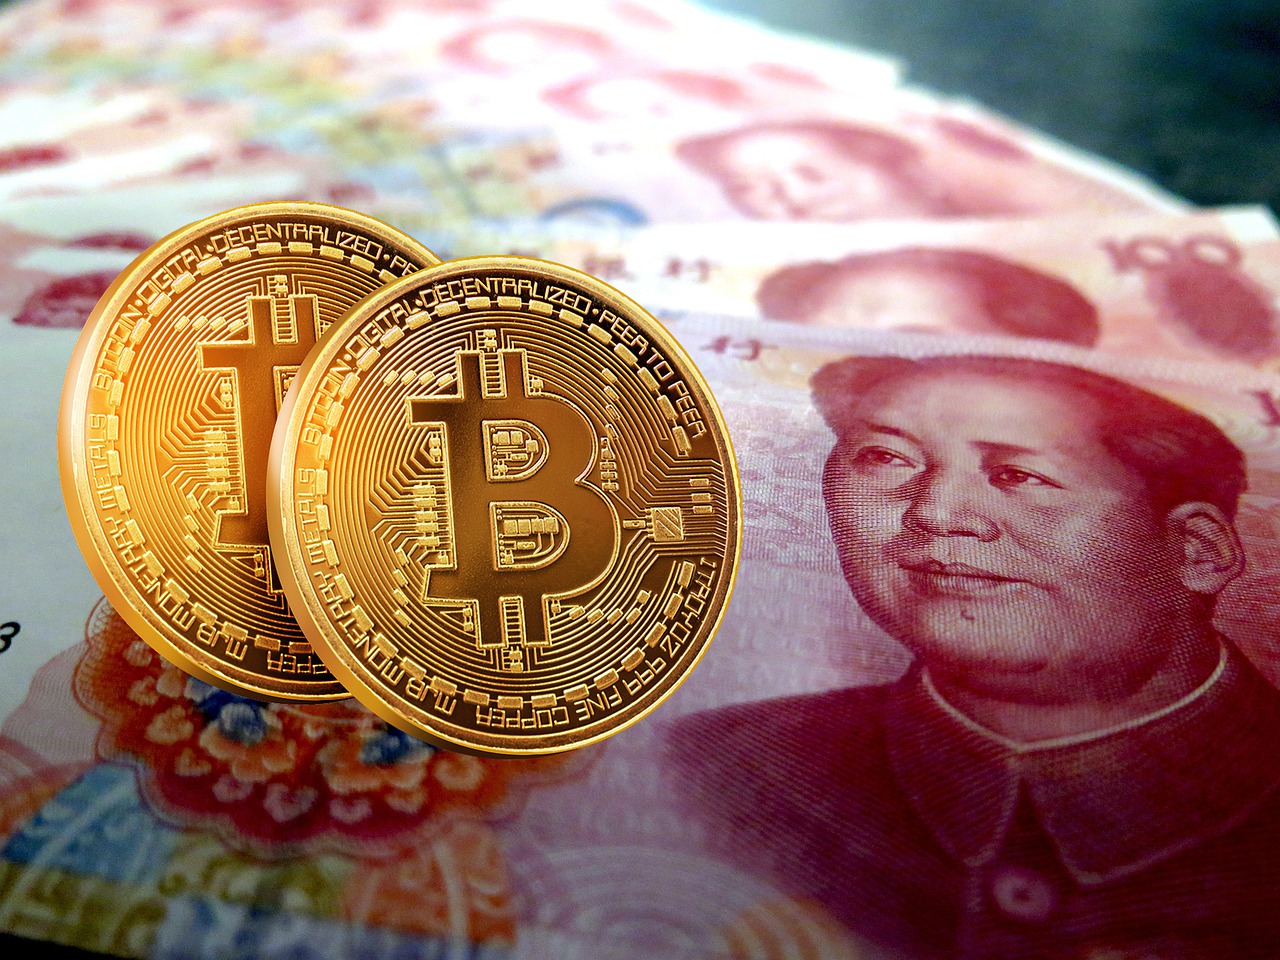 China's central bank declares cryptocurrency transactions illegal